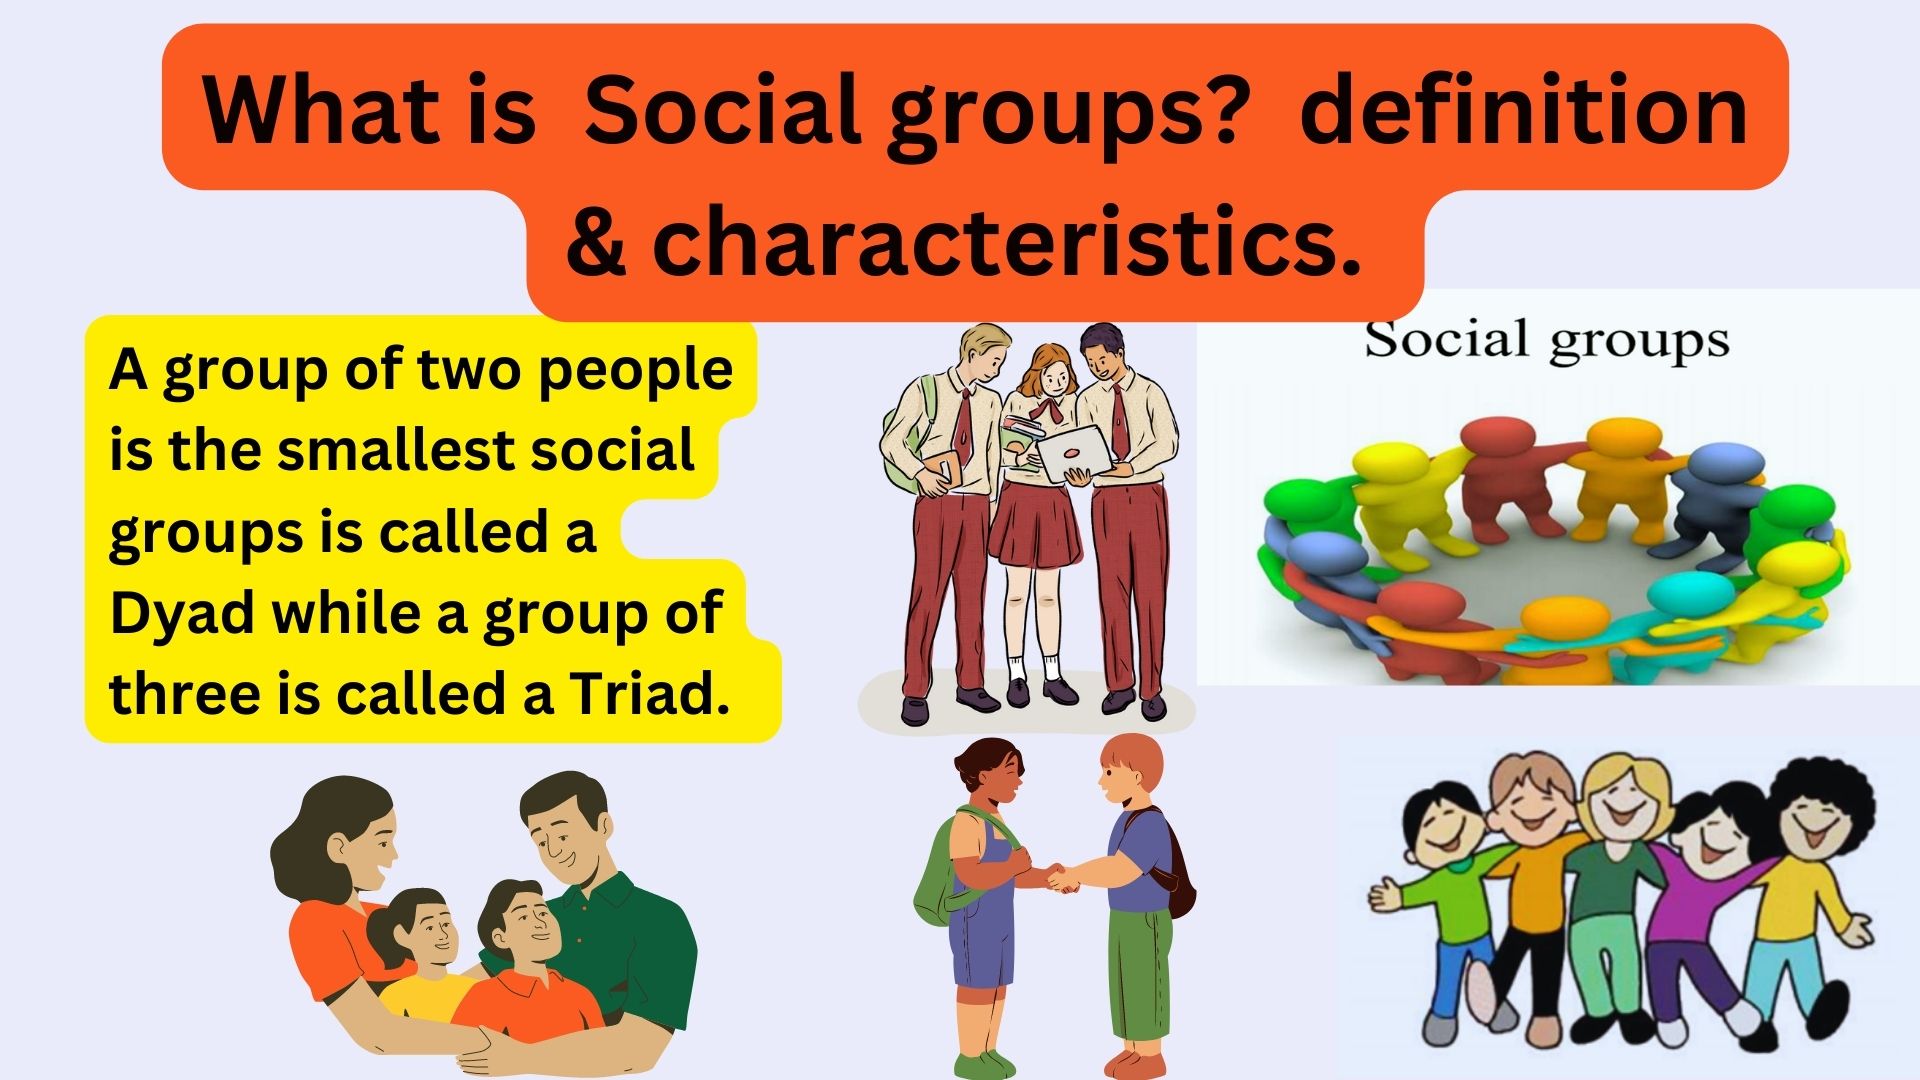 different types of social groups essay